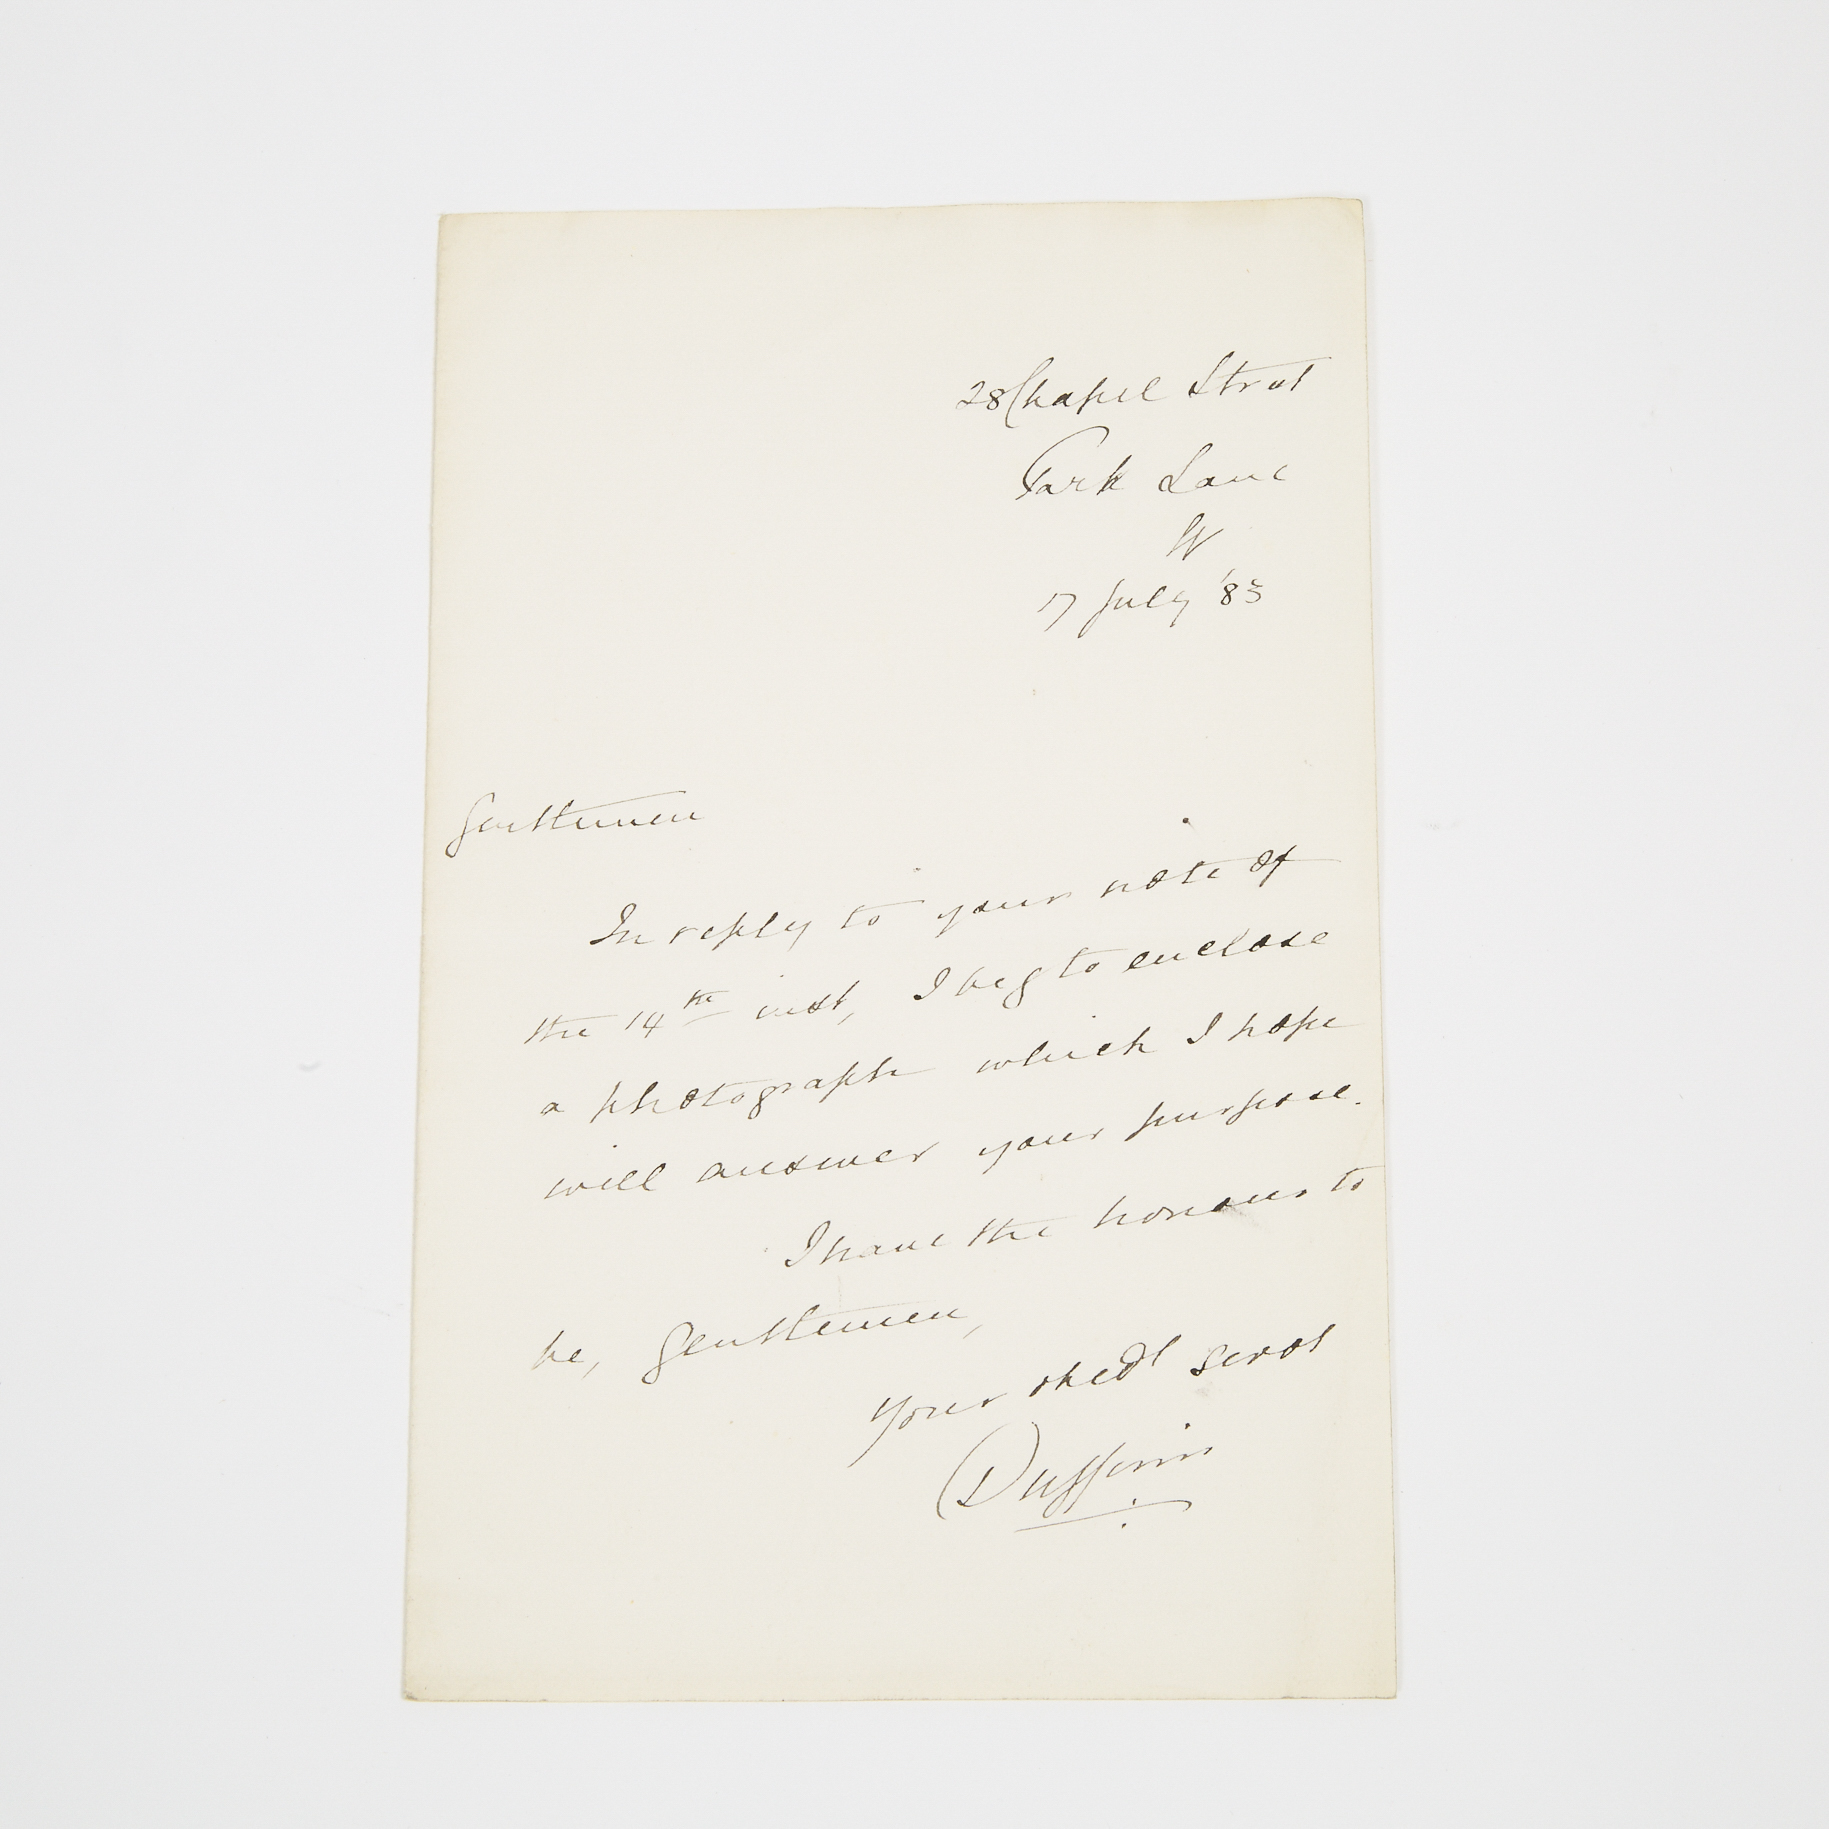 Lord Dufferin Autographed Signed Letter, 17 July, 1883